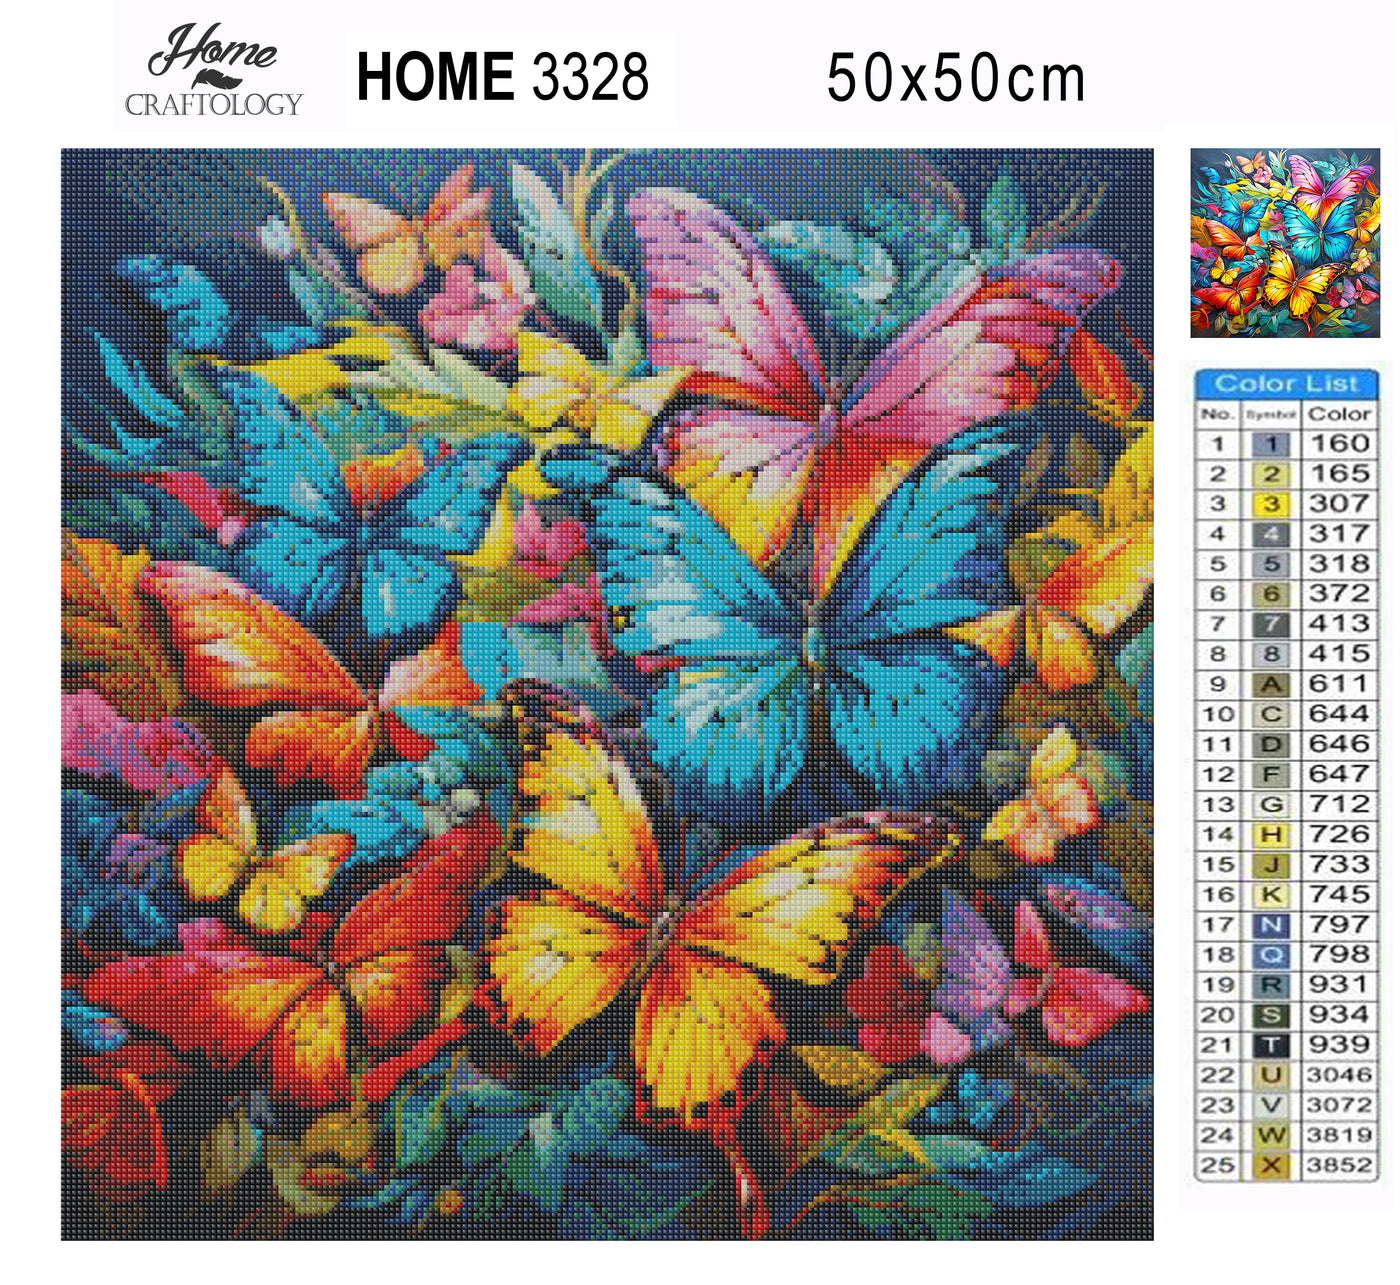 Colorful Leaves and Butterflies - Premium Diamond Painting Kit